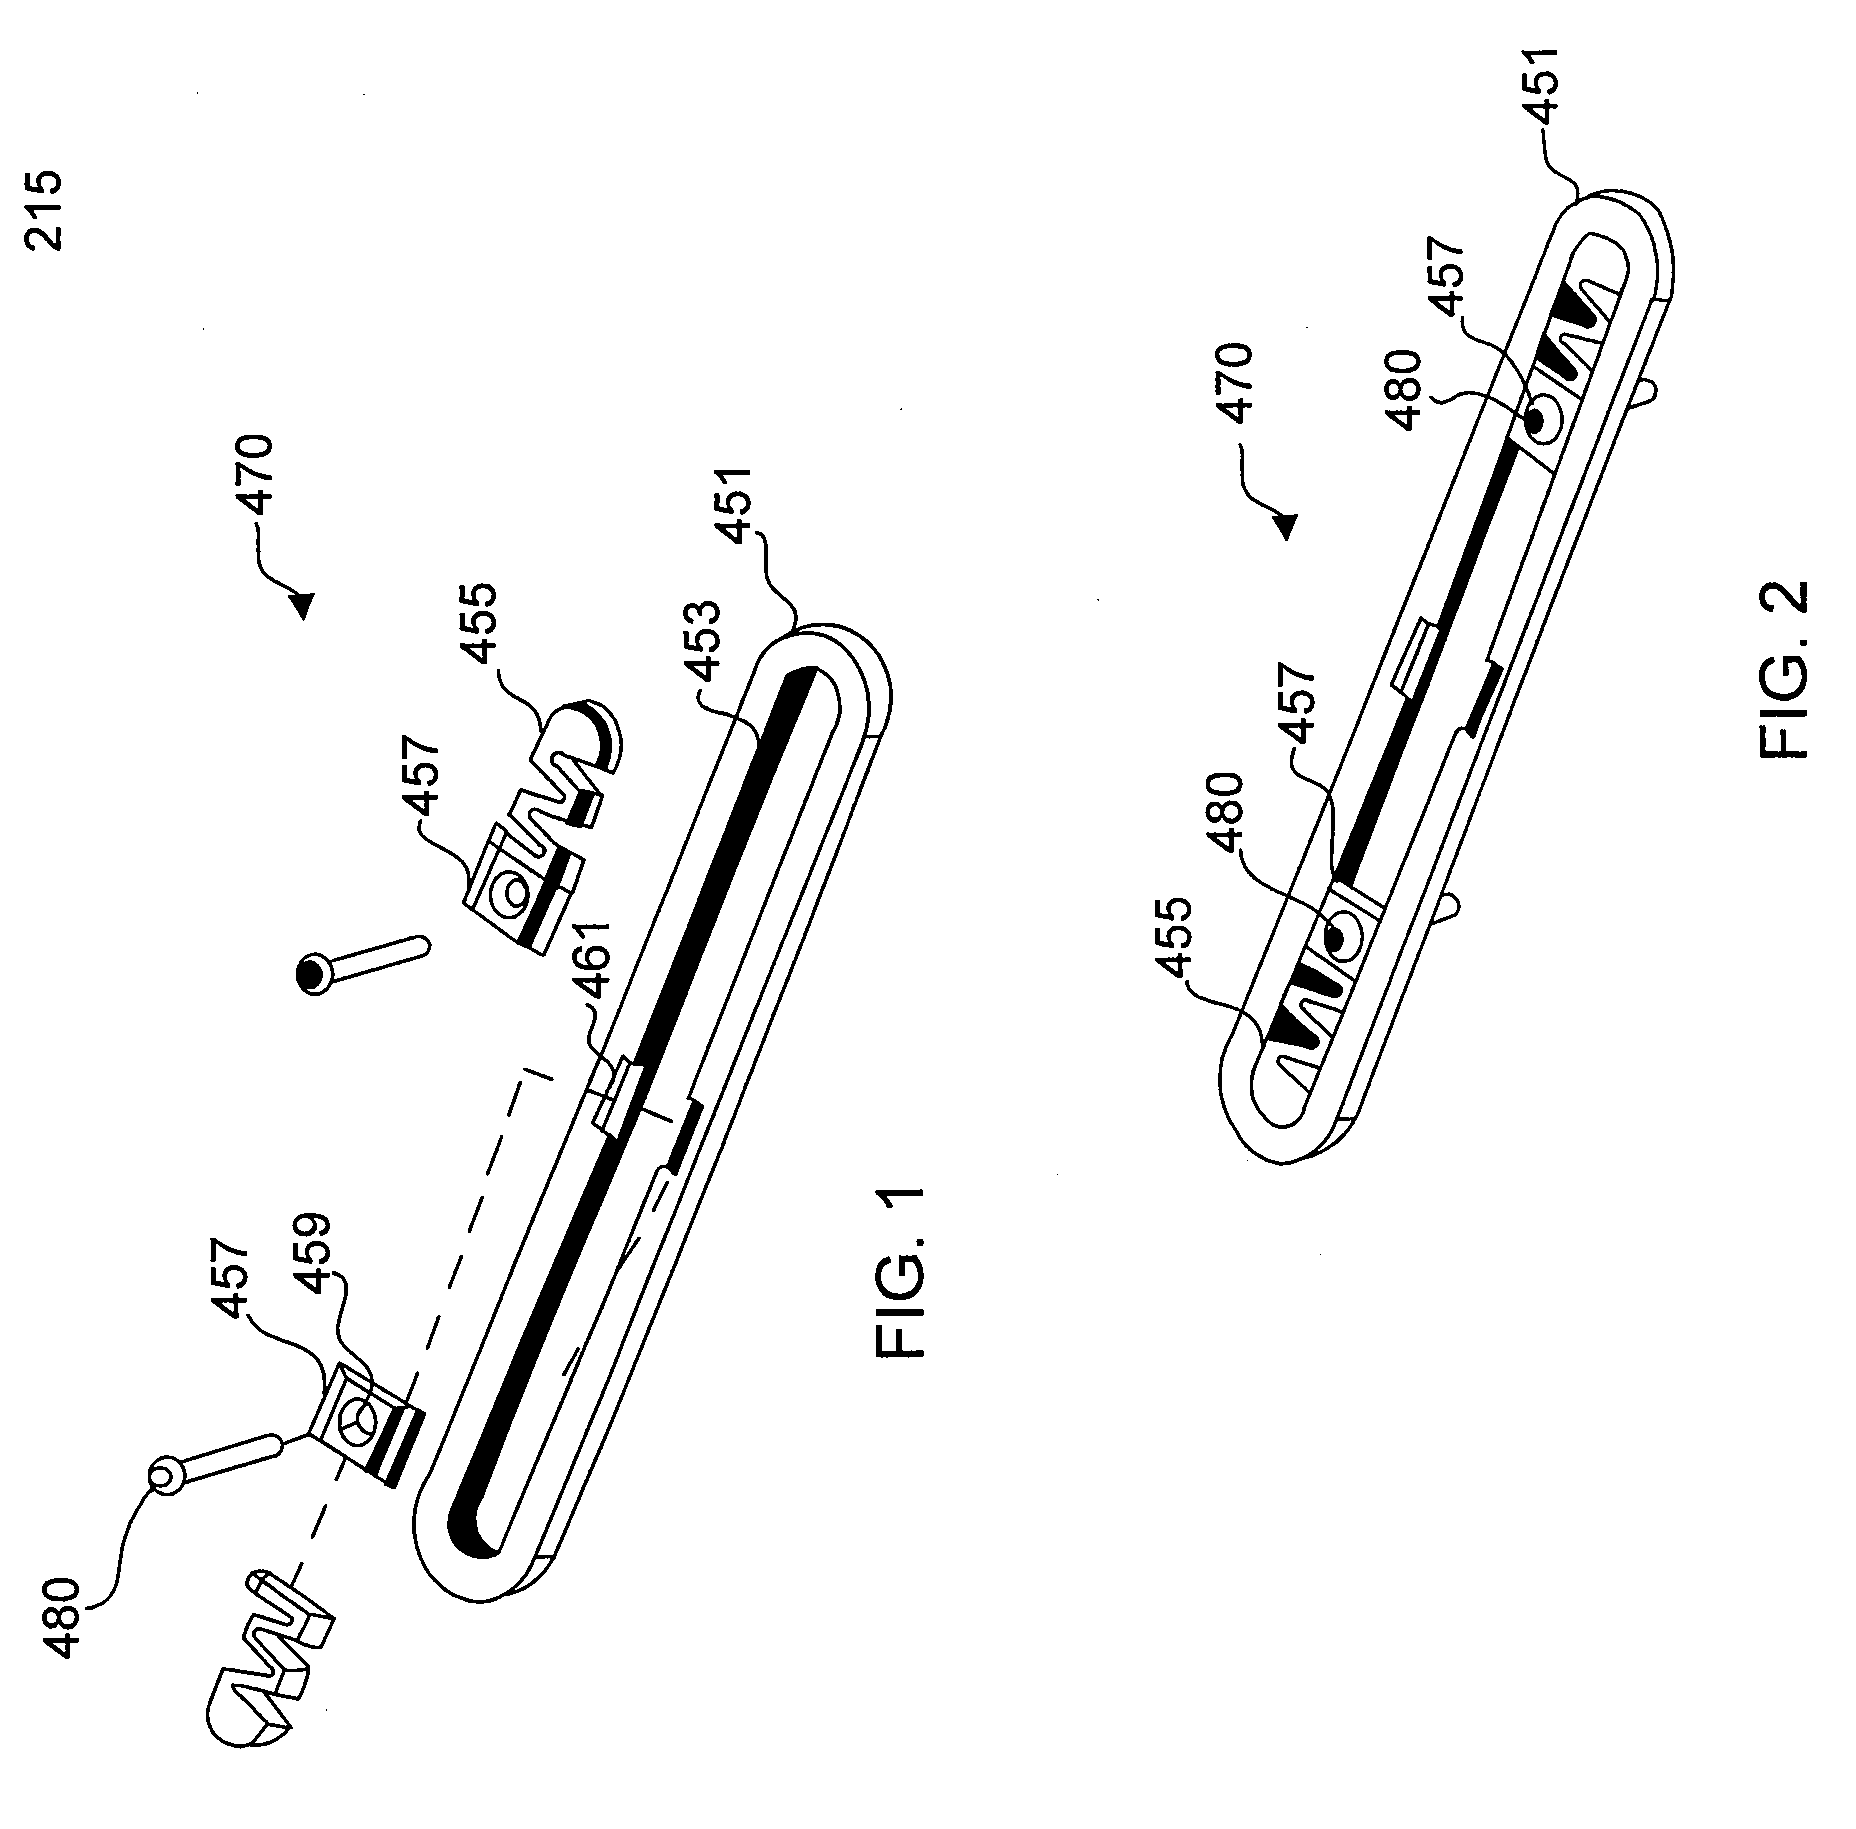 Bone screw system and method for the fixation of bone fractures